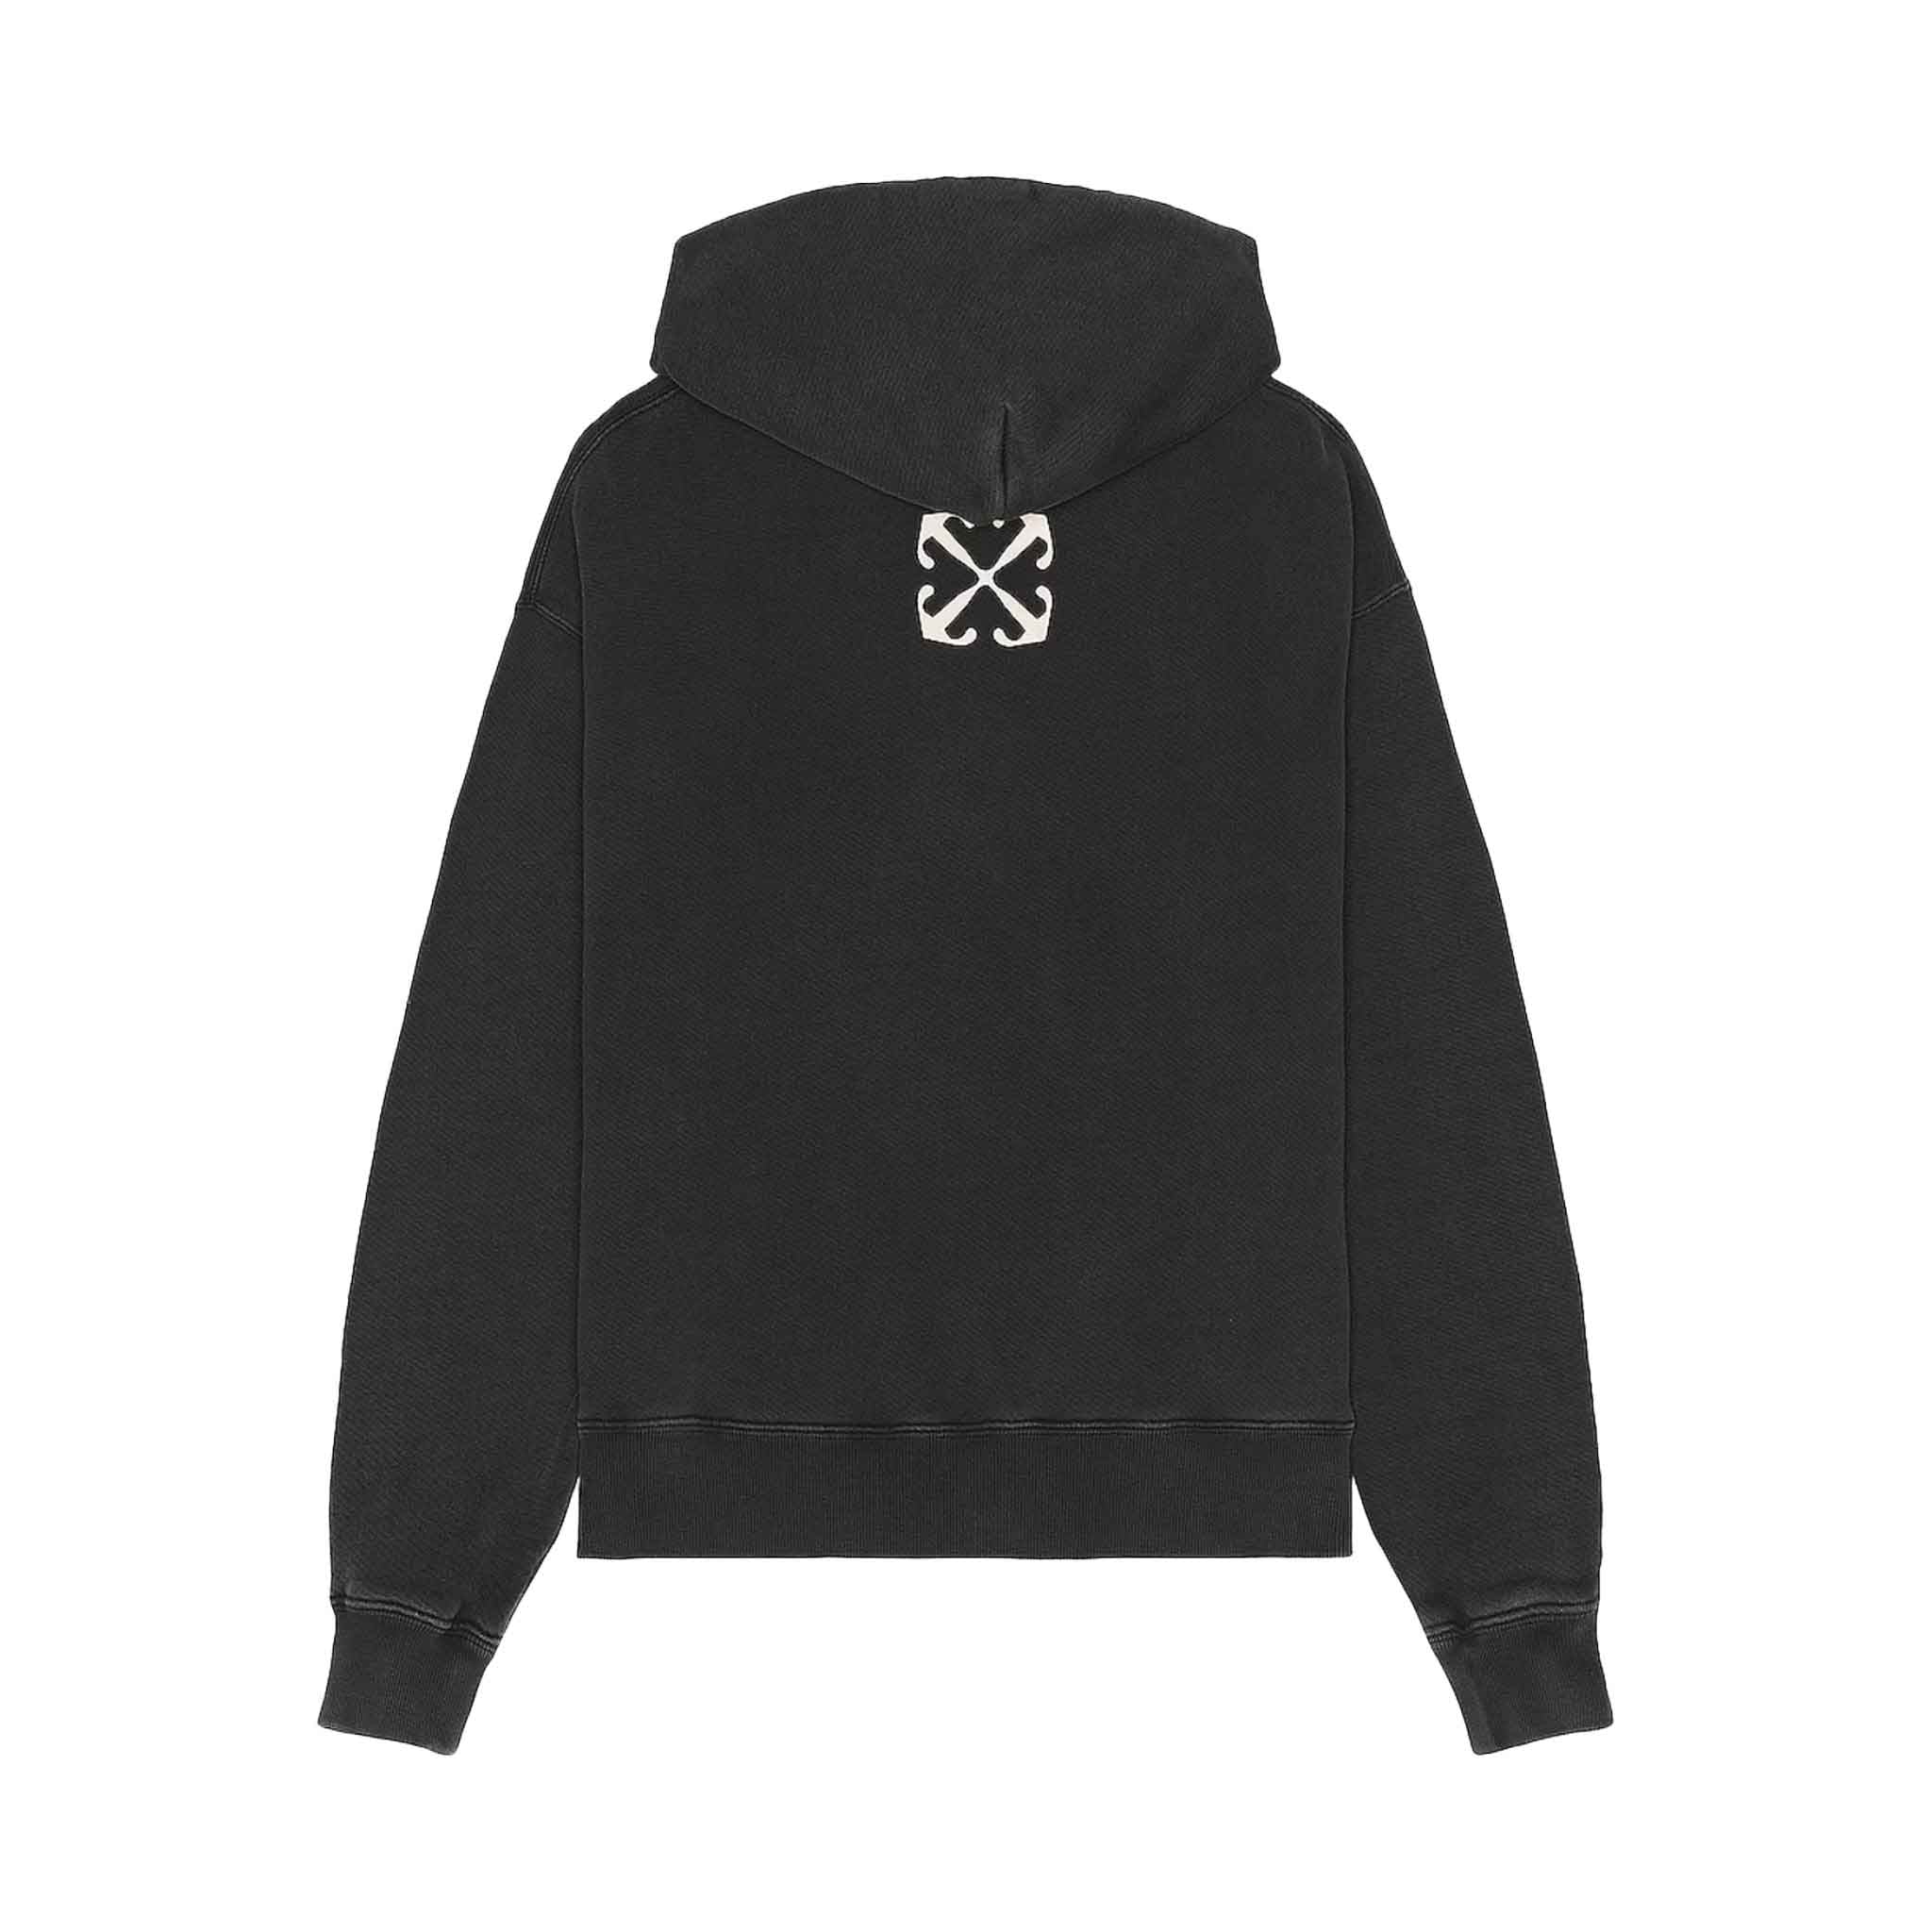 OFF-WHITE St Matthew Skate Hoodie in Washed Black